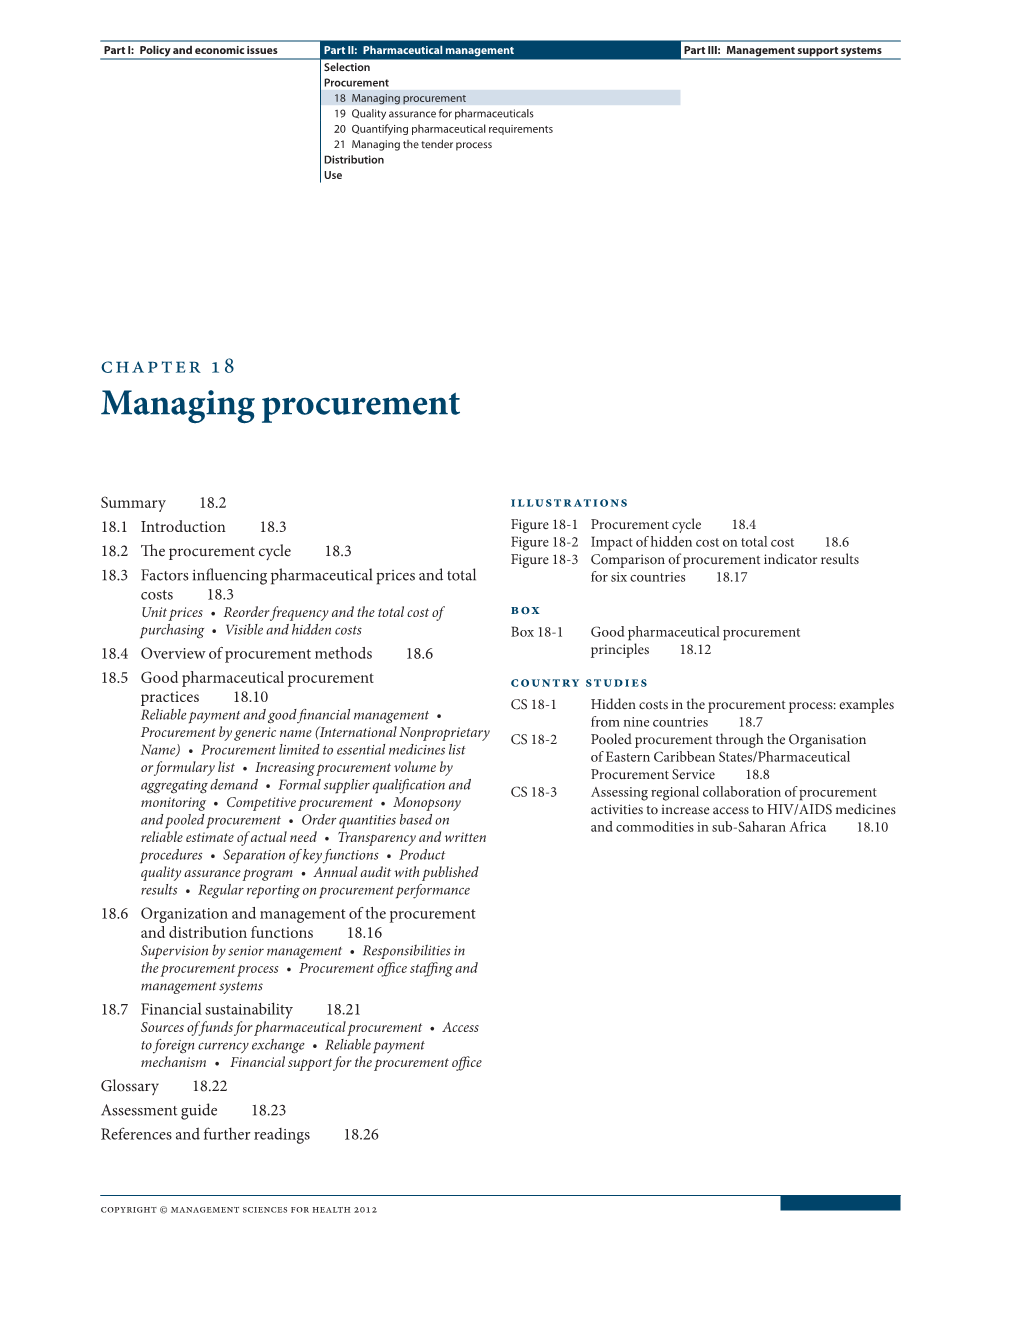 Managing Procurement 19 Quality Assurance for Pharmaceuticals 20 Quantifying Pharmaceutical Requirements 21 Managing the Tender Process Distribution Use